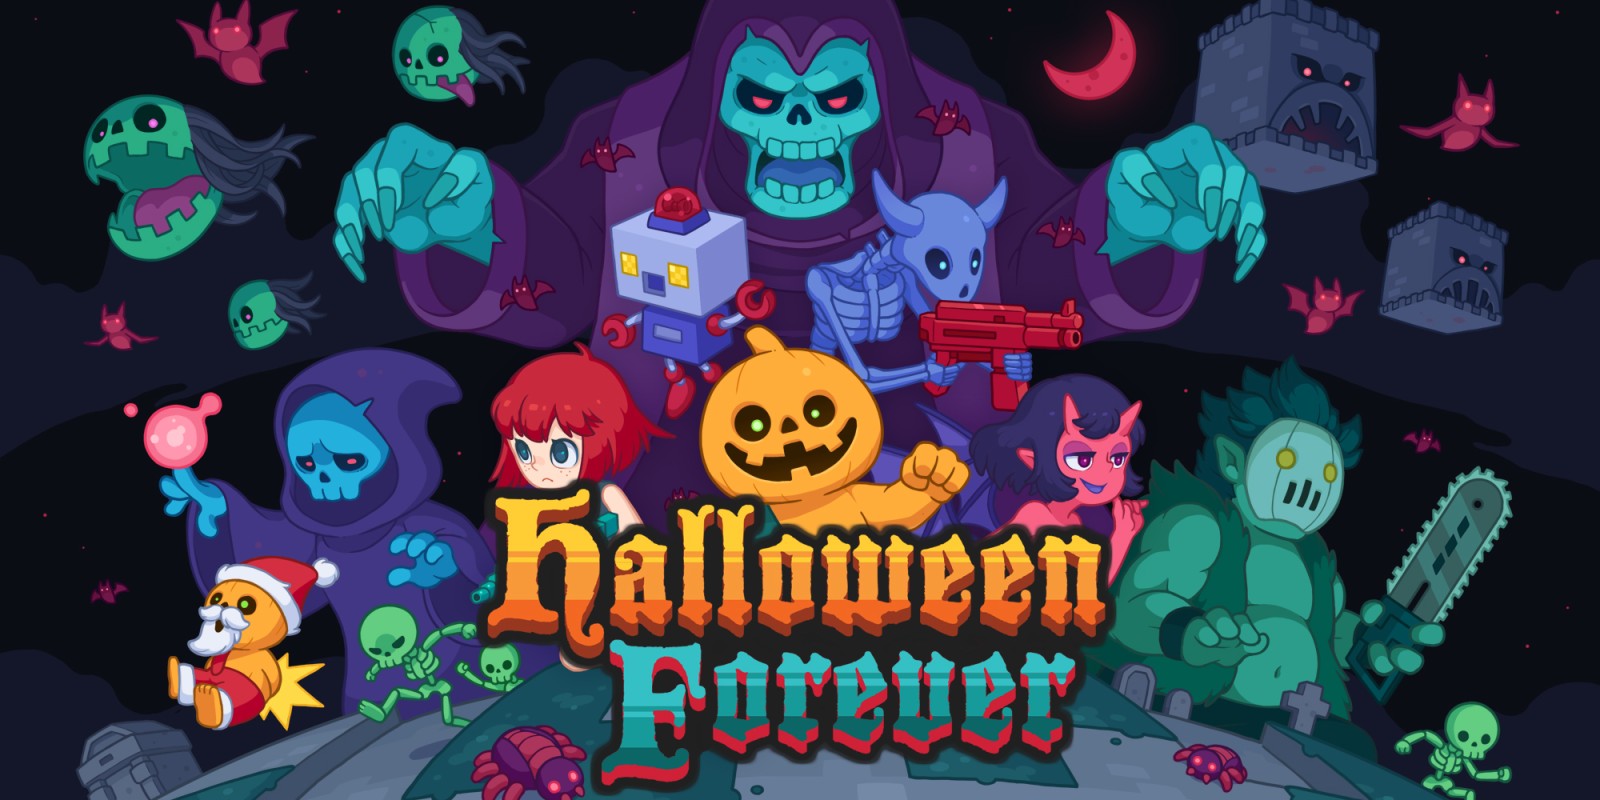 https://cdn03.nintendo-europe.com/media/images/10_share_images/games_15/nintendo_switch_download_software_1/H2x1_NSwitchDS_HalloweenForever_image1600w.jpg